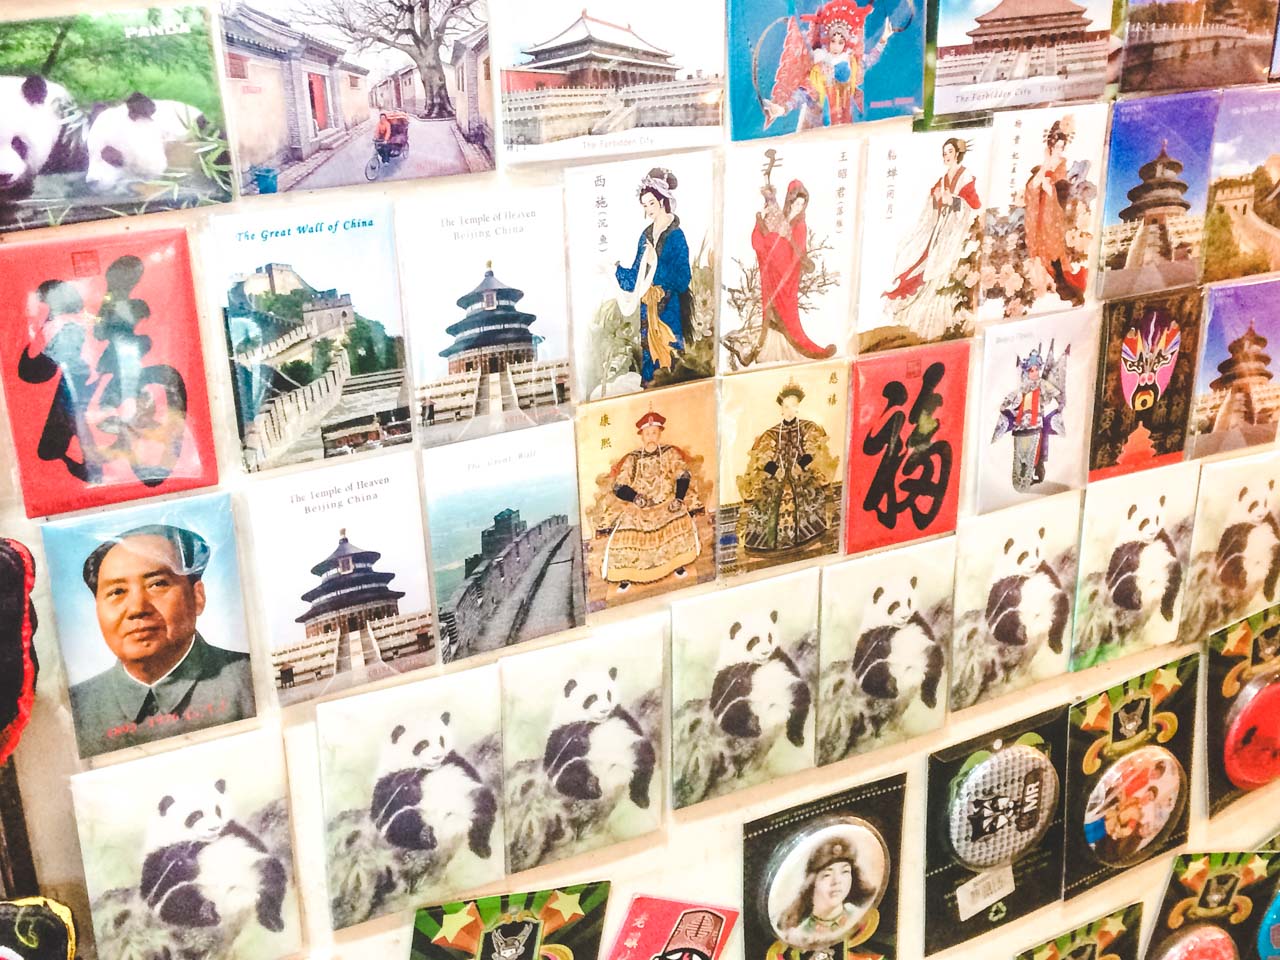 Various magnets featuring Mao Zedong, the giant panda and Beijing landmarks hanging on the wall